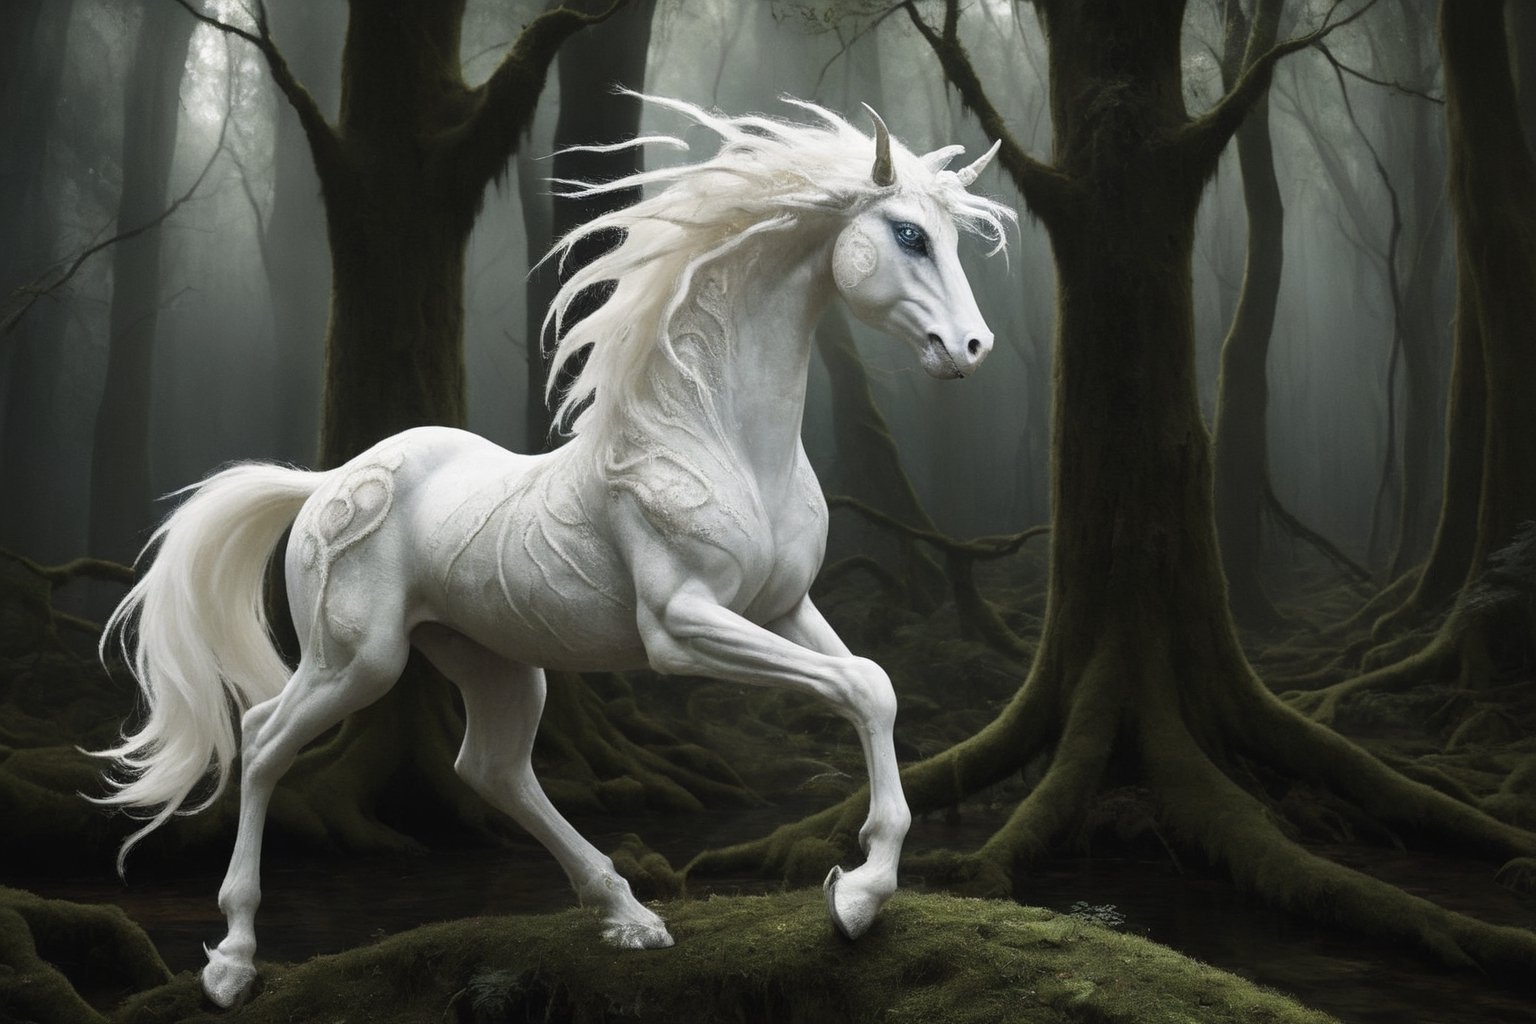 Imagine a mystical space realm where a white spider horse gallops with grace through a dense forest, its eight legs gracefully carrying it over moss-covered ground. The sight is simultaneously horrifying and awe-inspiring, as the white horse's ethereal beauty is contrasted against its monstrous spider-like features. The horse's ebony eyes mesmerize, reflecting the light in a haunting and captivating manner. This breathtaking image, depicted in a vividly painted masterpiece, immerses viewers in the fantastical narrative of an otherworldly creature navigating a mysterious and enchanted woodland.